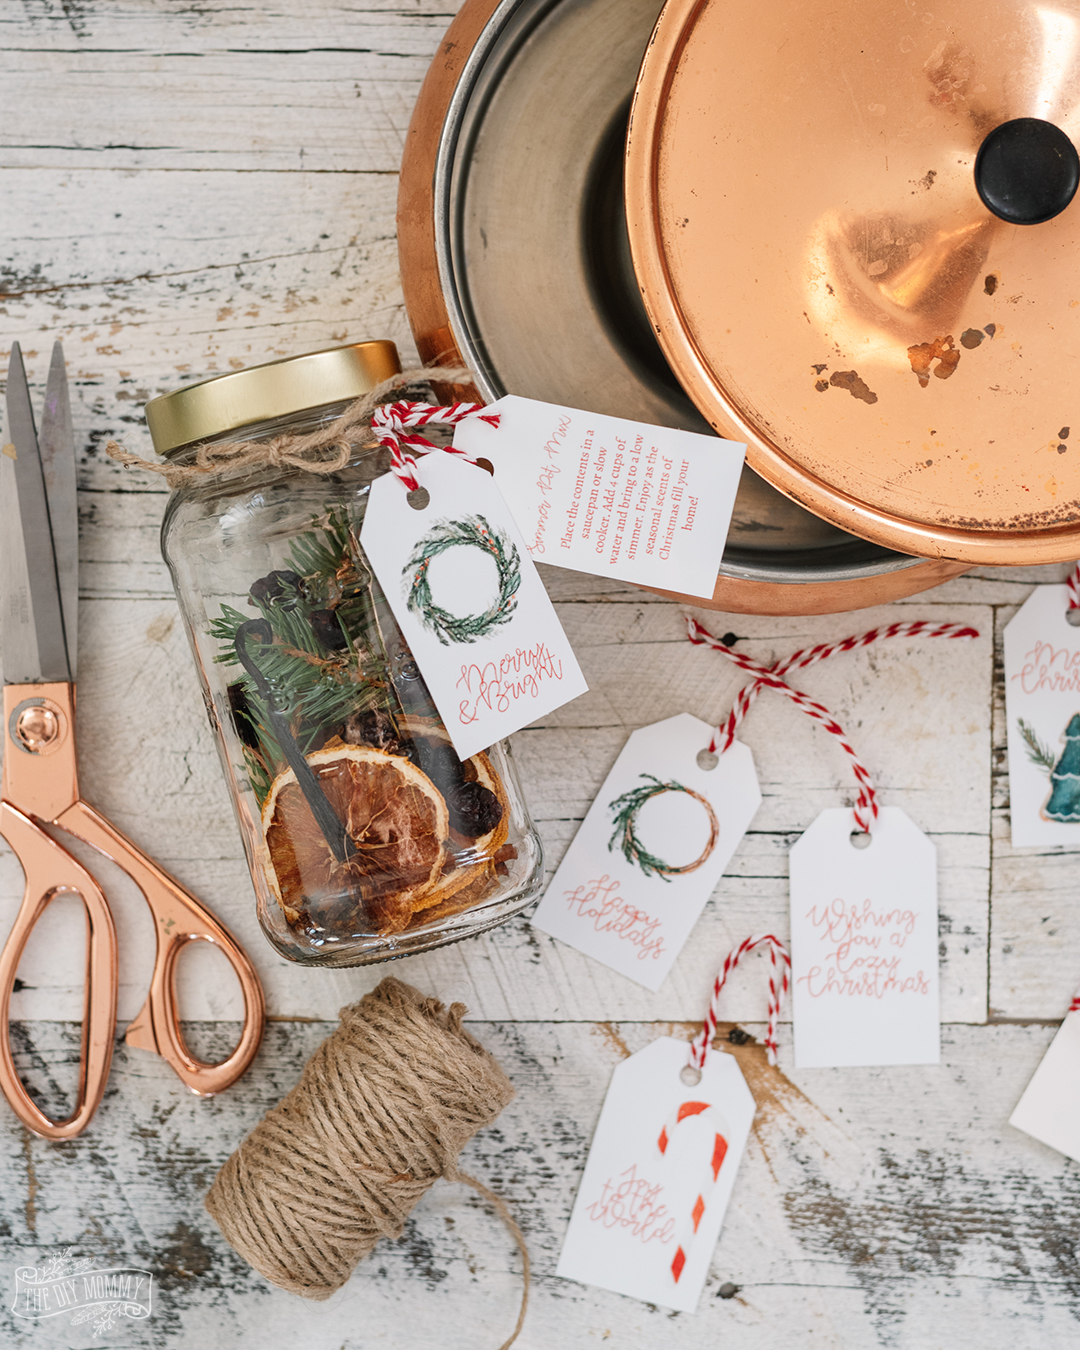 Budget friendly DIY simmer pot with dried fruit, spices and greenery and some handmade tags! I'm sure any teacher will love this simple but meaningful Christmas gift idea. 